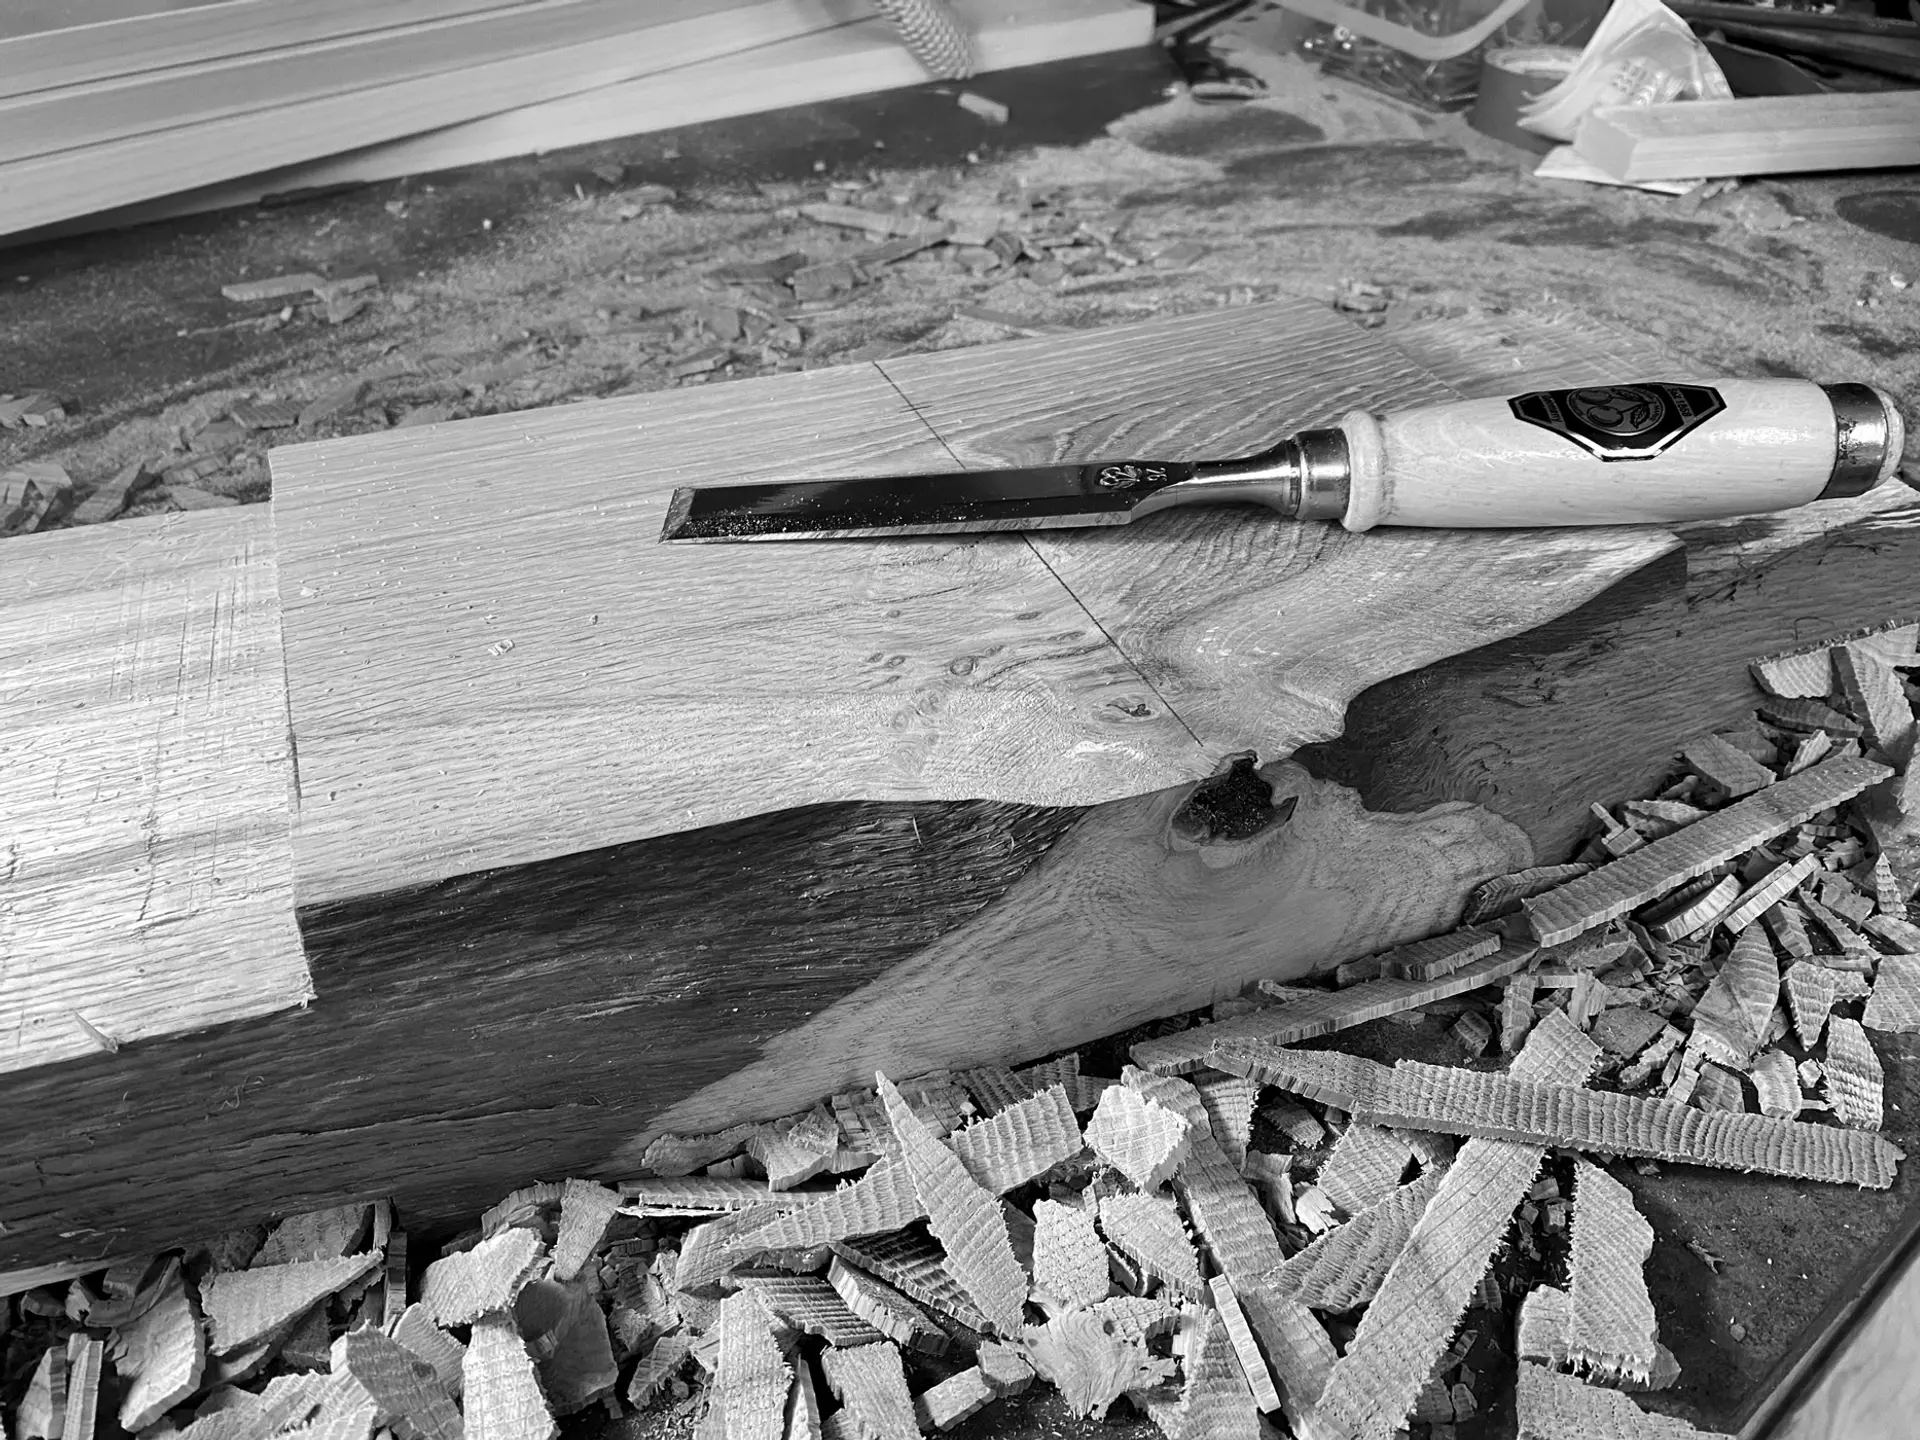 A greyscale photograph showing a plank of wood surrounded by wood shavings and woodchips. A woodwork tool sits on top of the plank, it has a cylindrical wooden handle and a long, flat metal head.